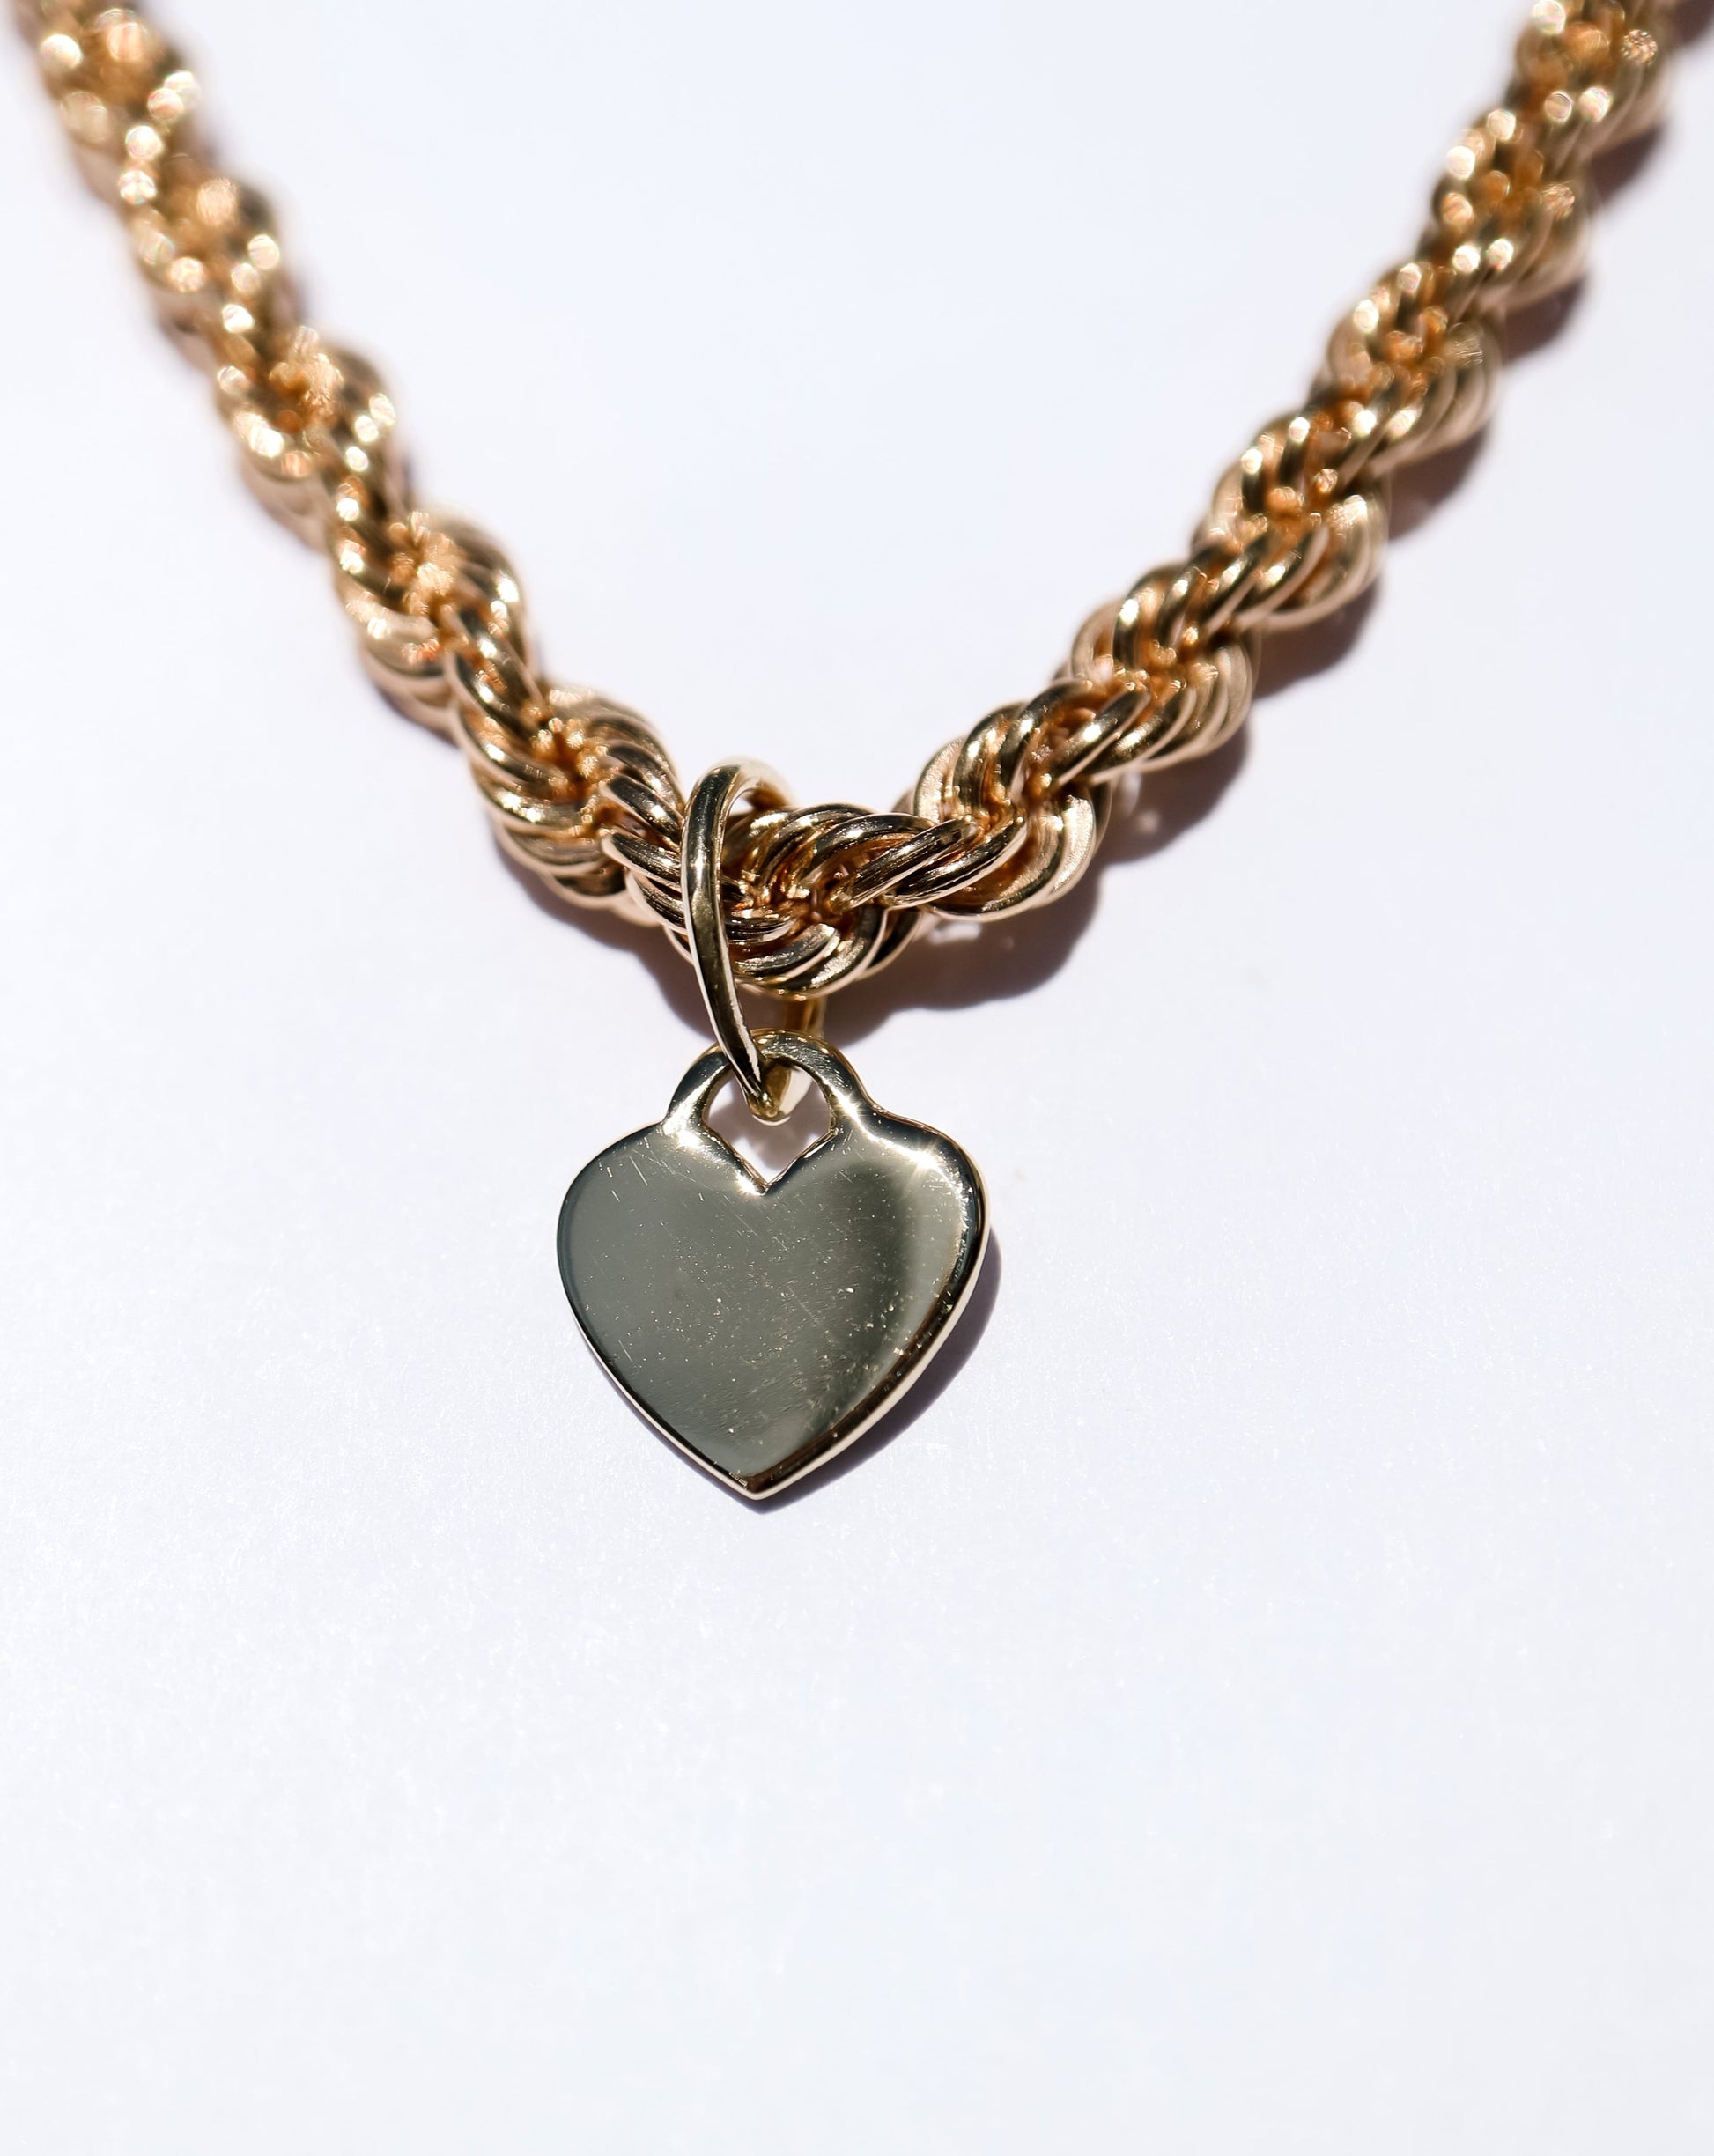 9ct gold Chunky Rope Bracelet with gold heart charm